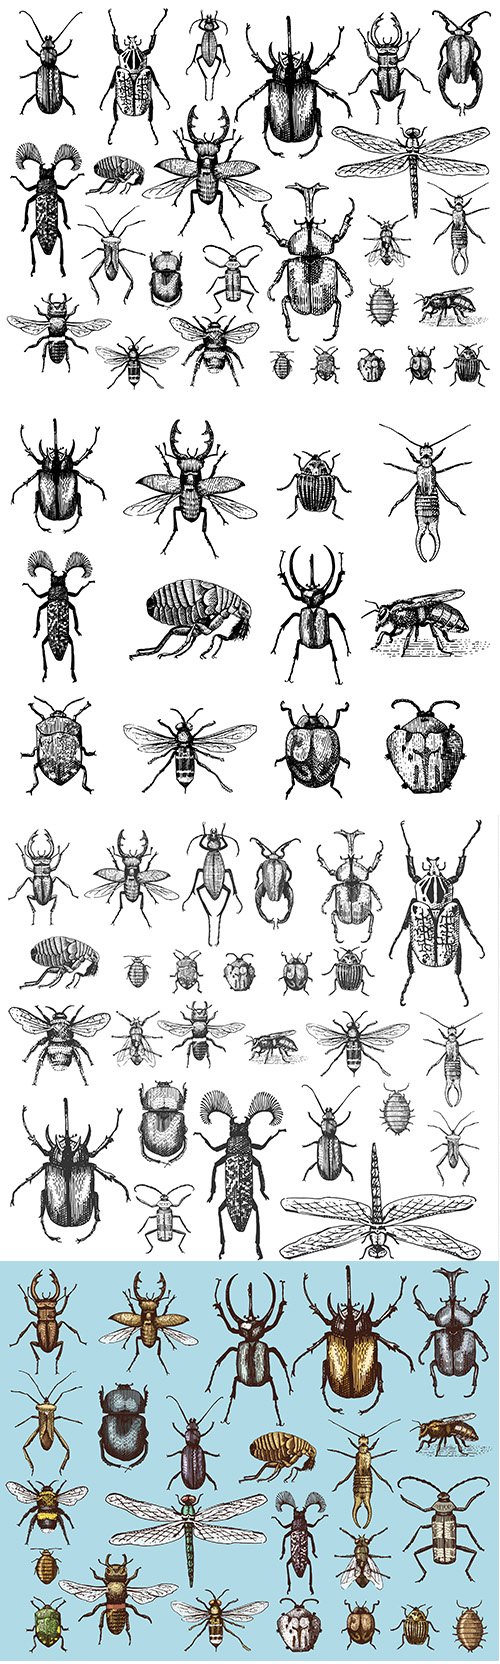 Big set of insects bugs beetles and bees in vintage old hand drawn style